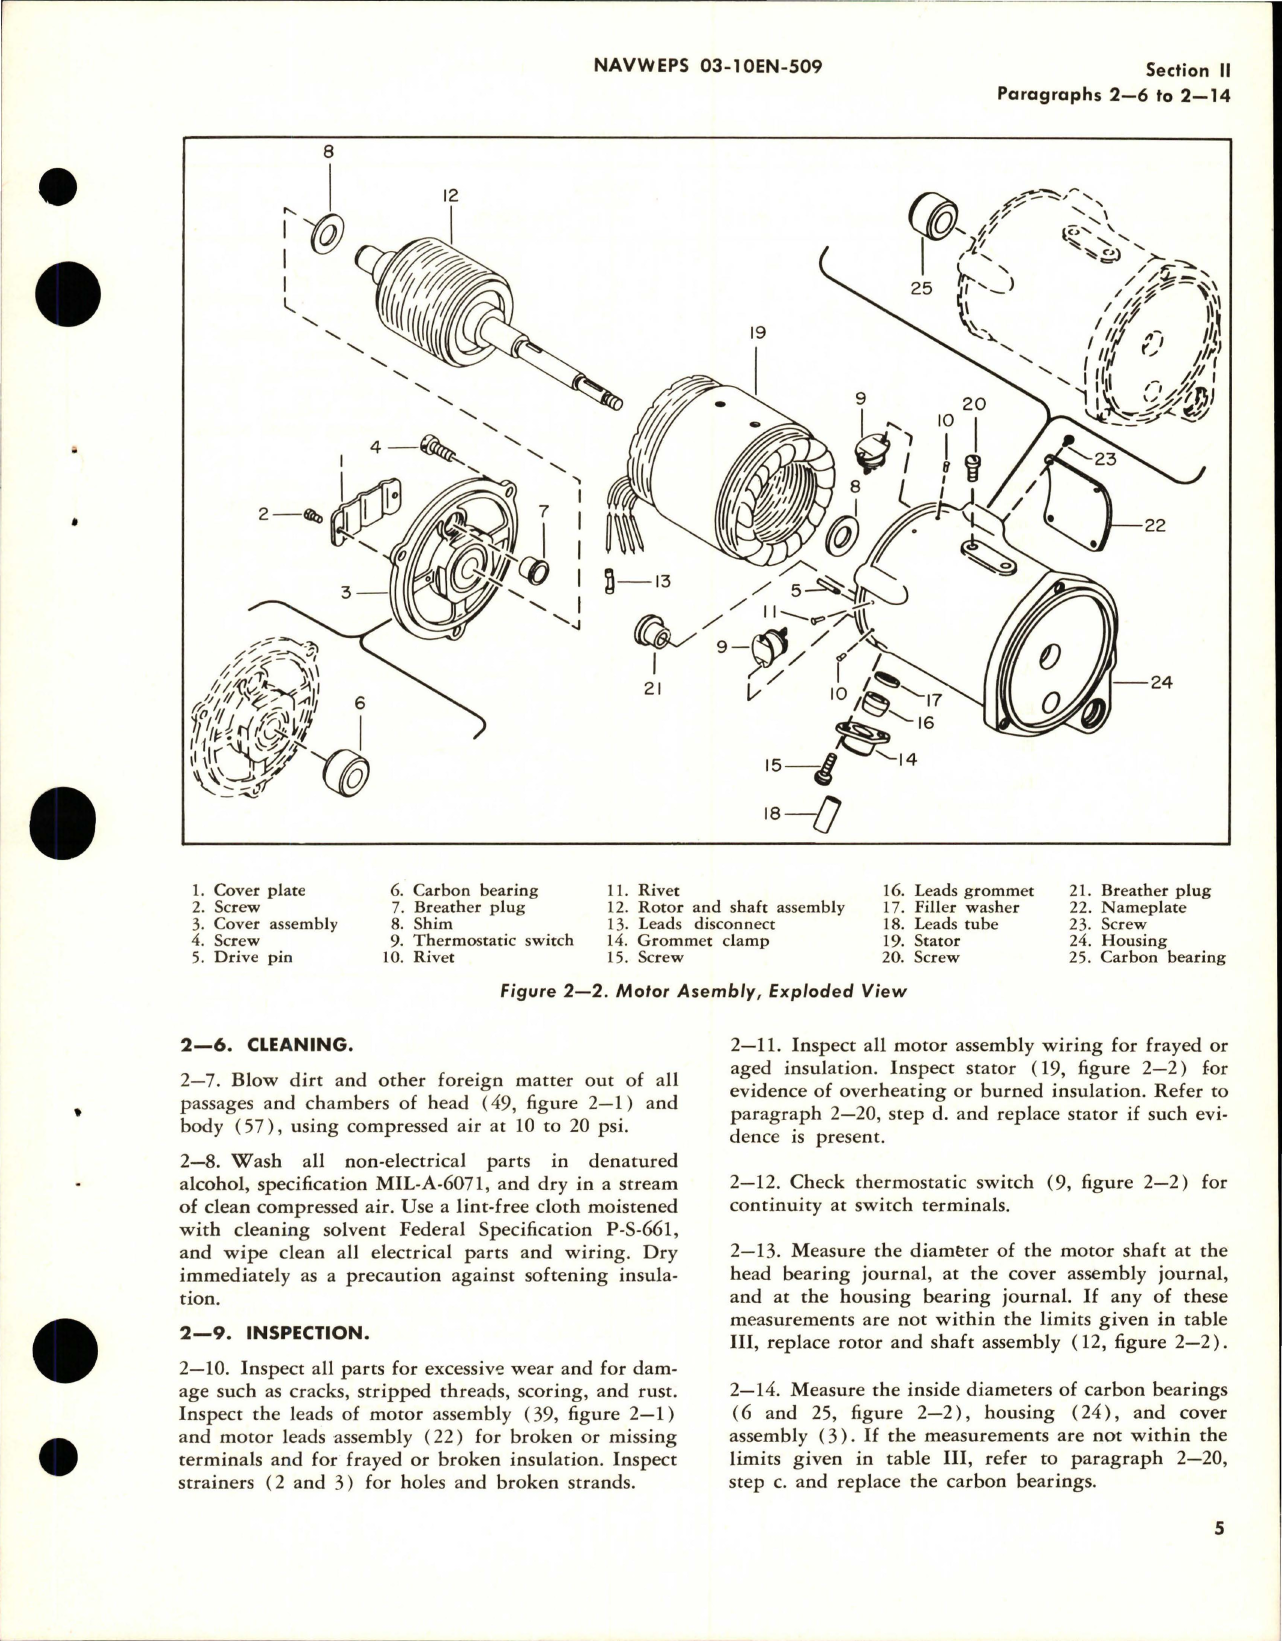 Sample page 7 from AirCorps Library document: Overhaul Instructions for Fuel Booster Pumps 